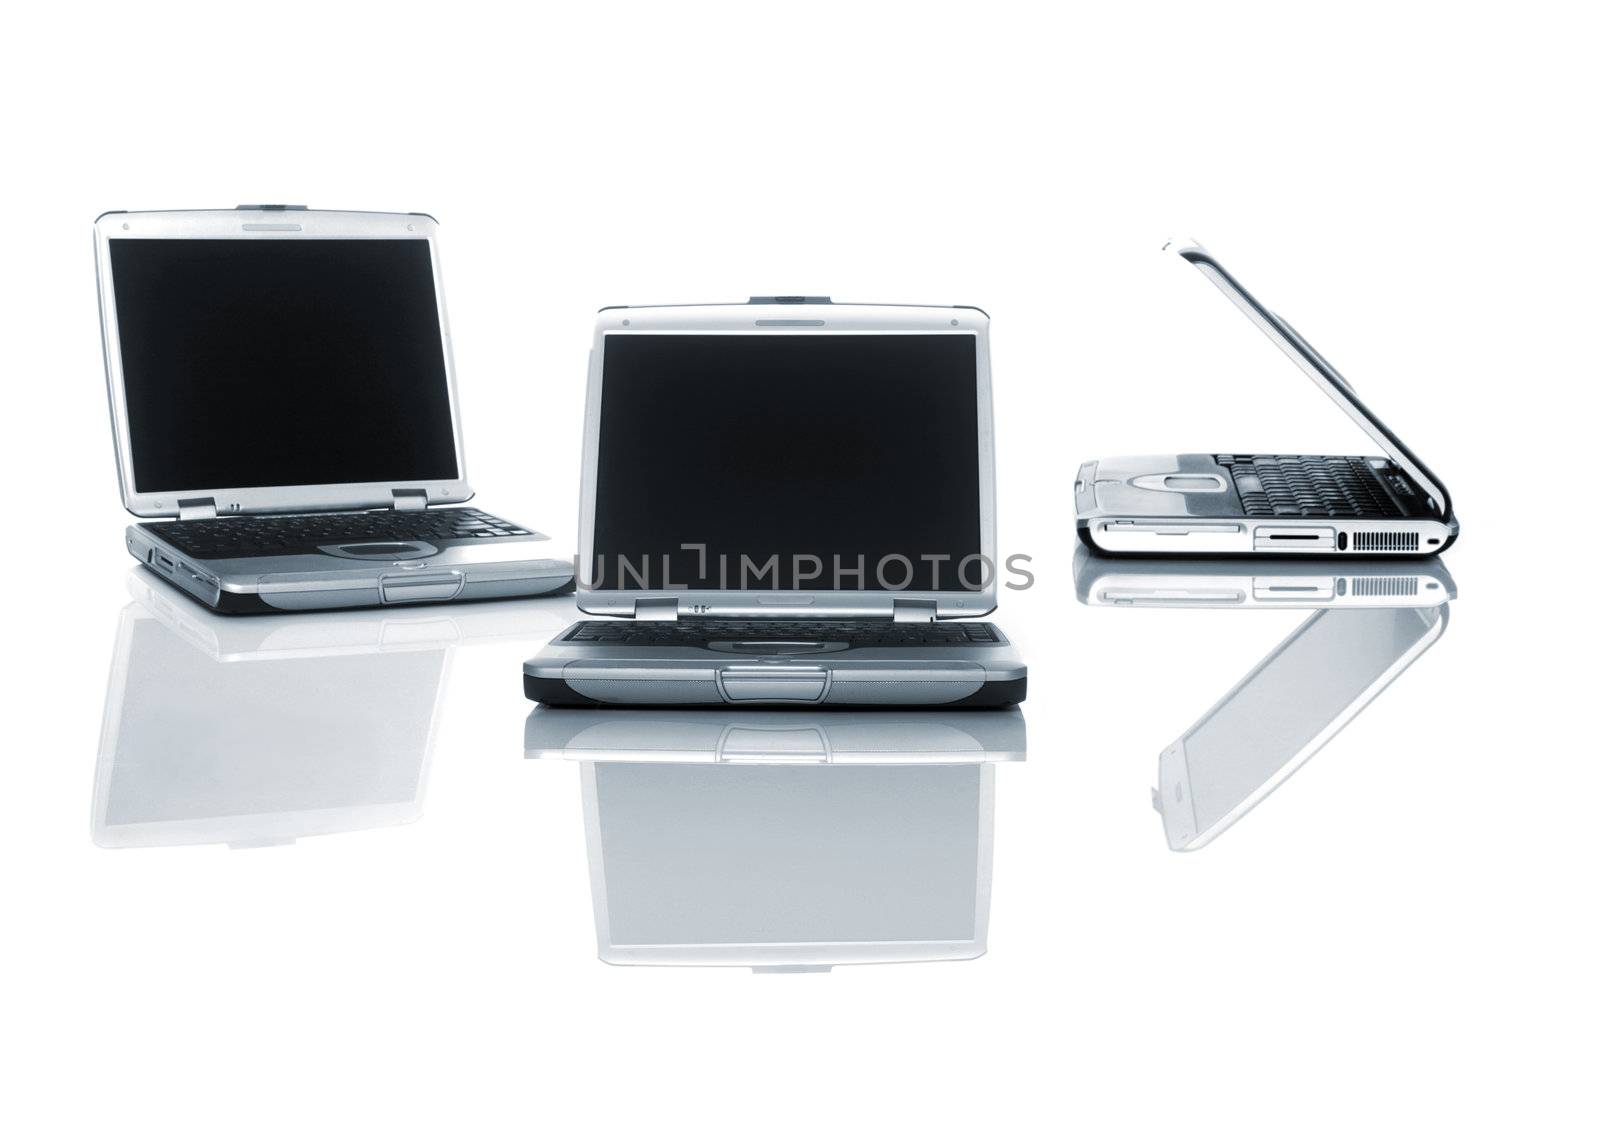 3 Silver Laptops over a table with reflection